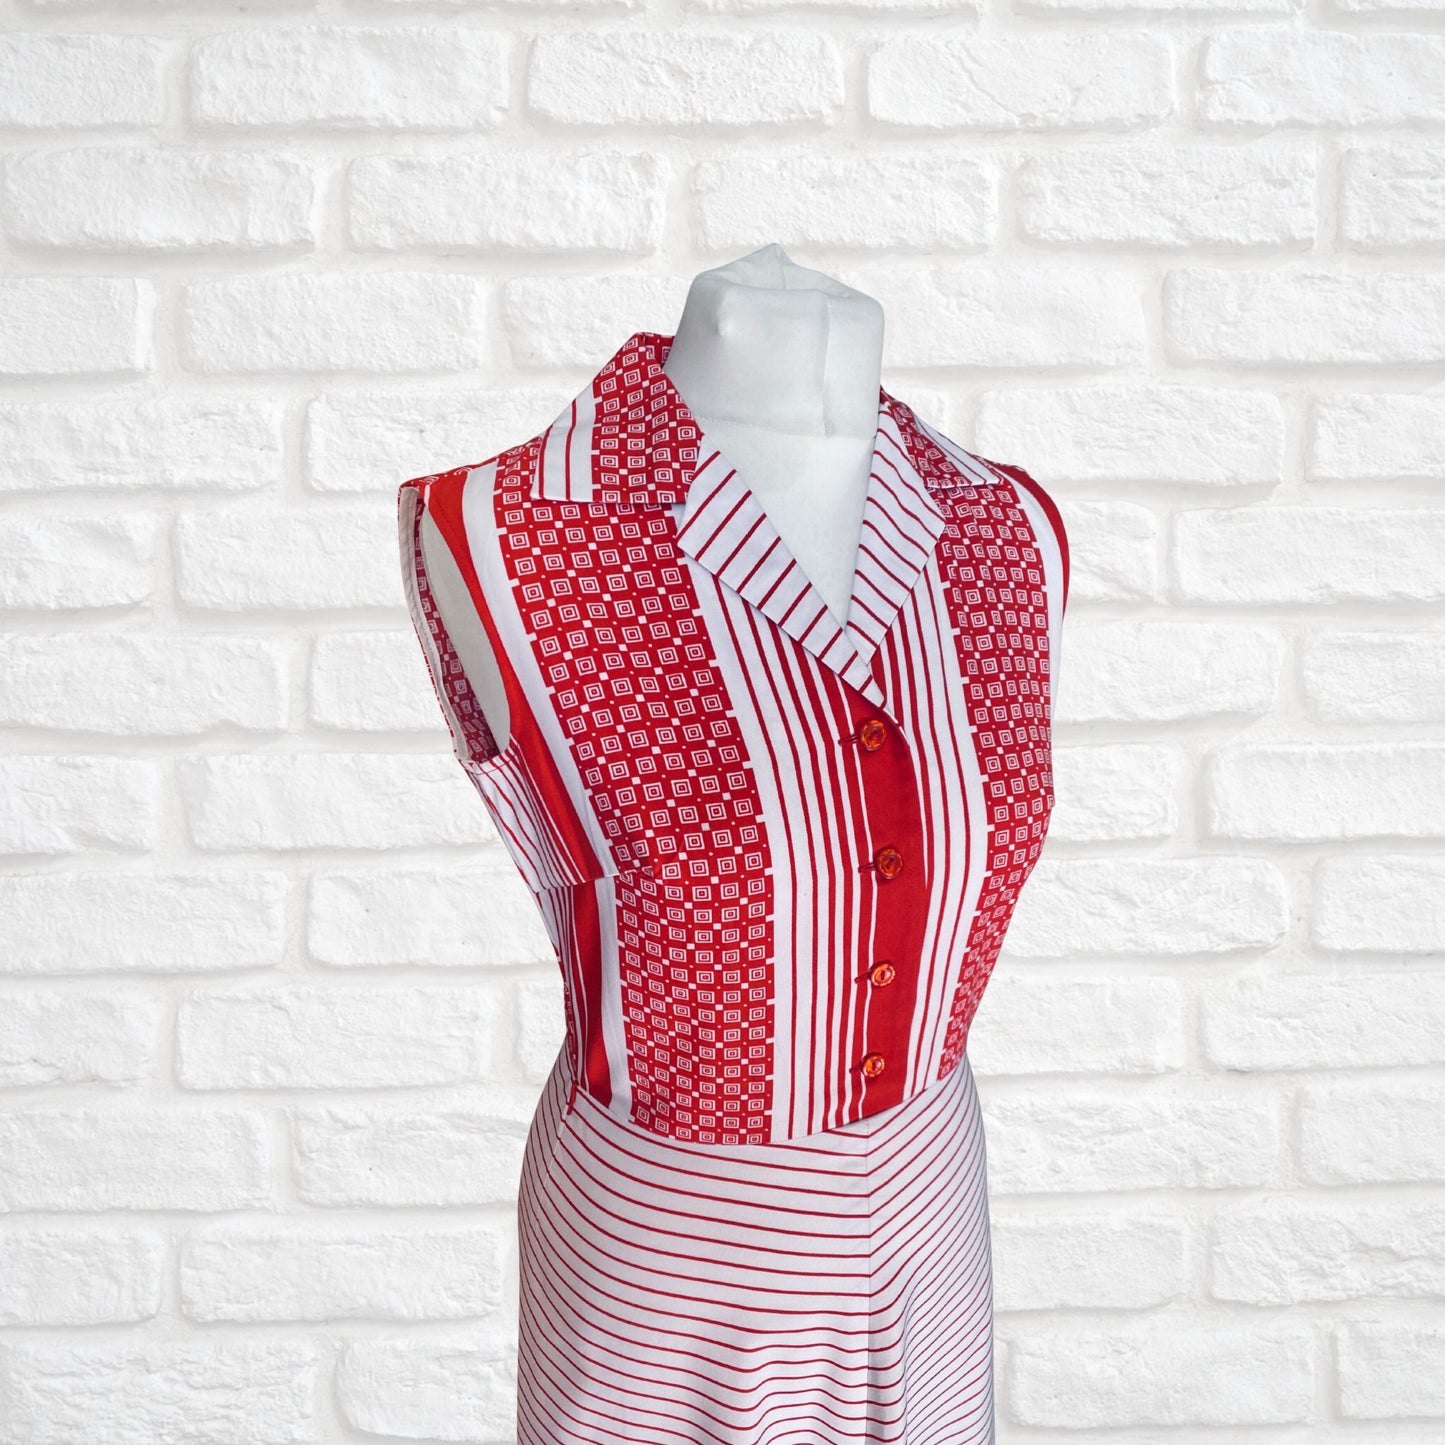 Vintage red and white open collar geometric and striped midi dress. Approx UK size 8- 10